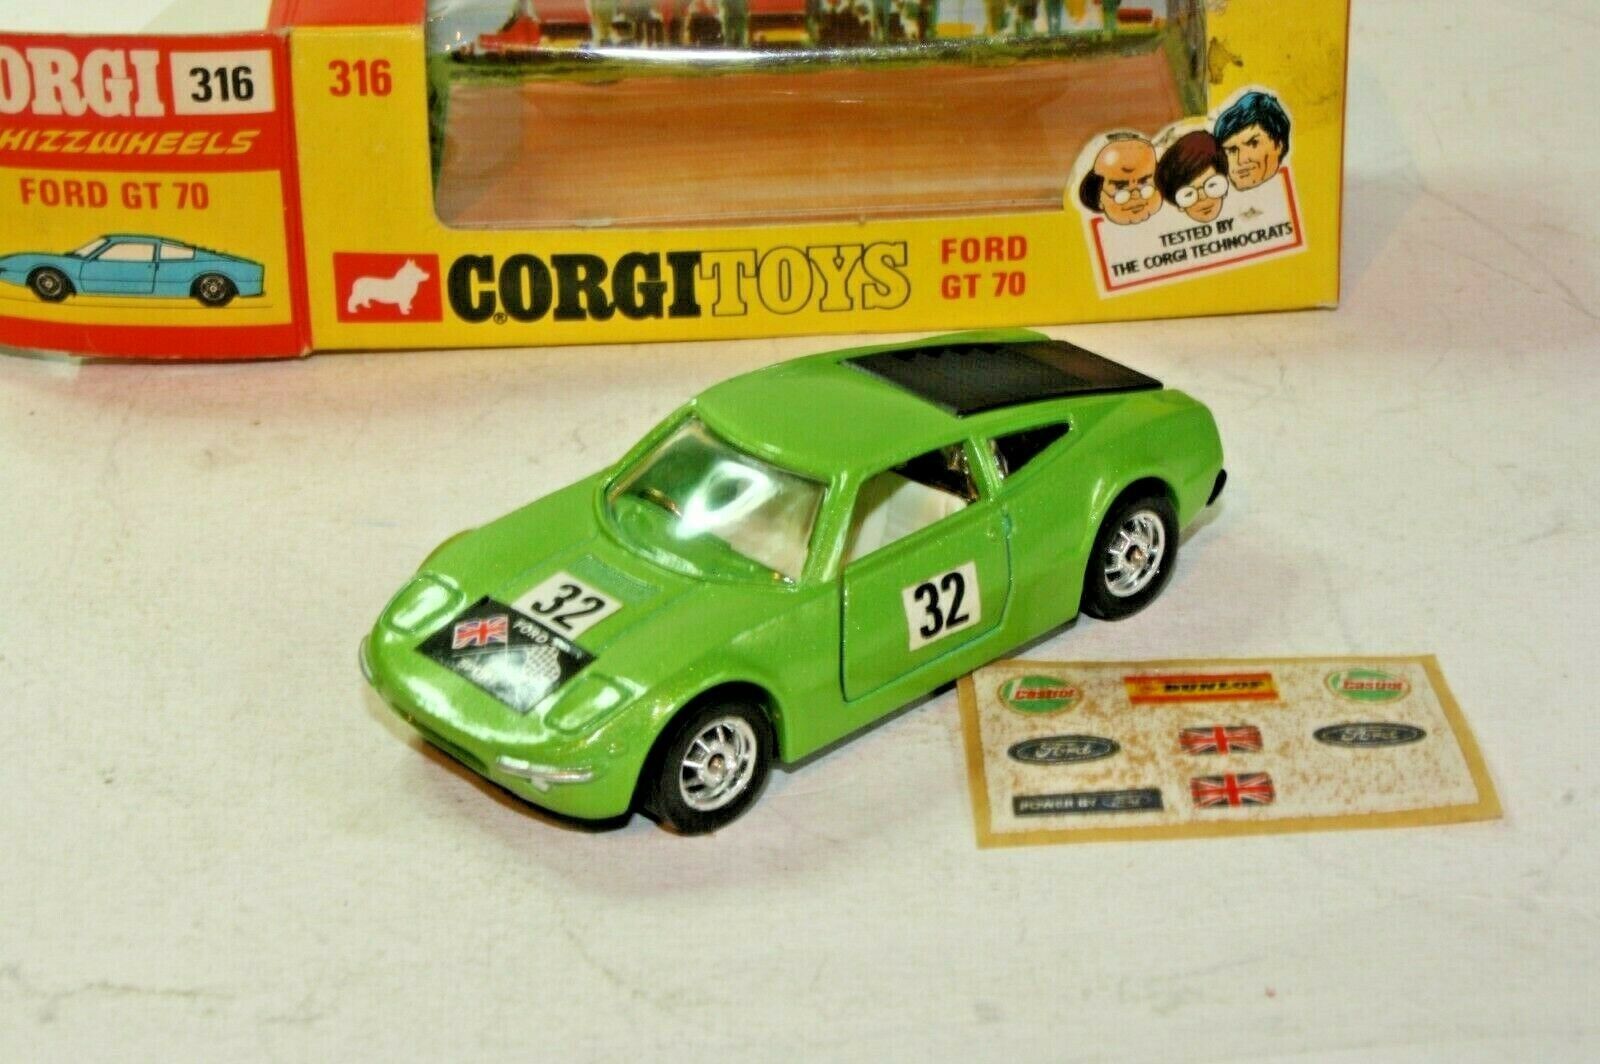 Corgi Whizzwheels 316 Ford GT70 decal set only 